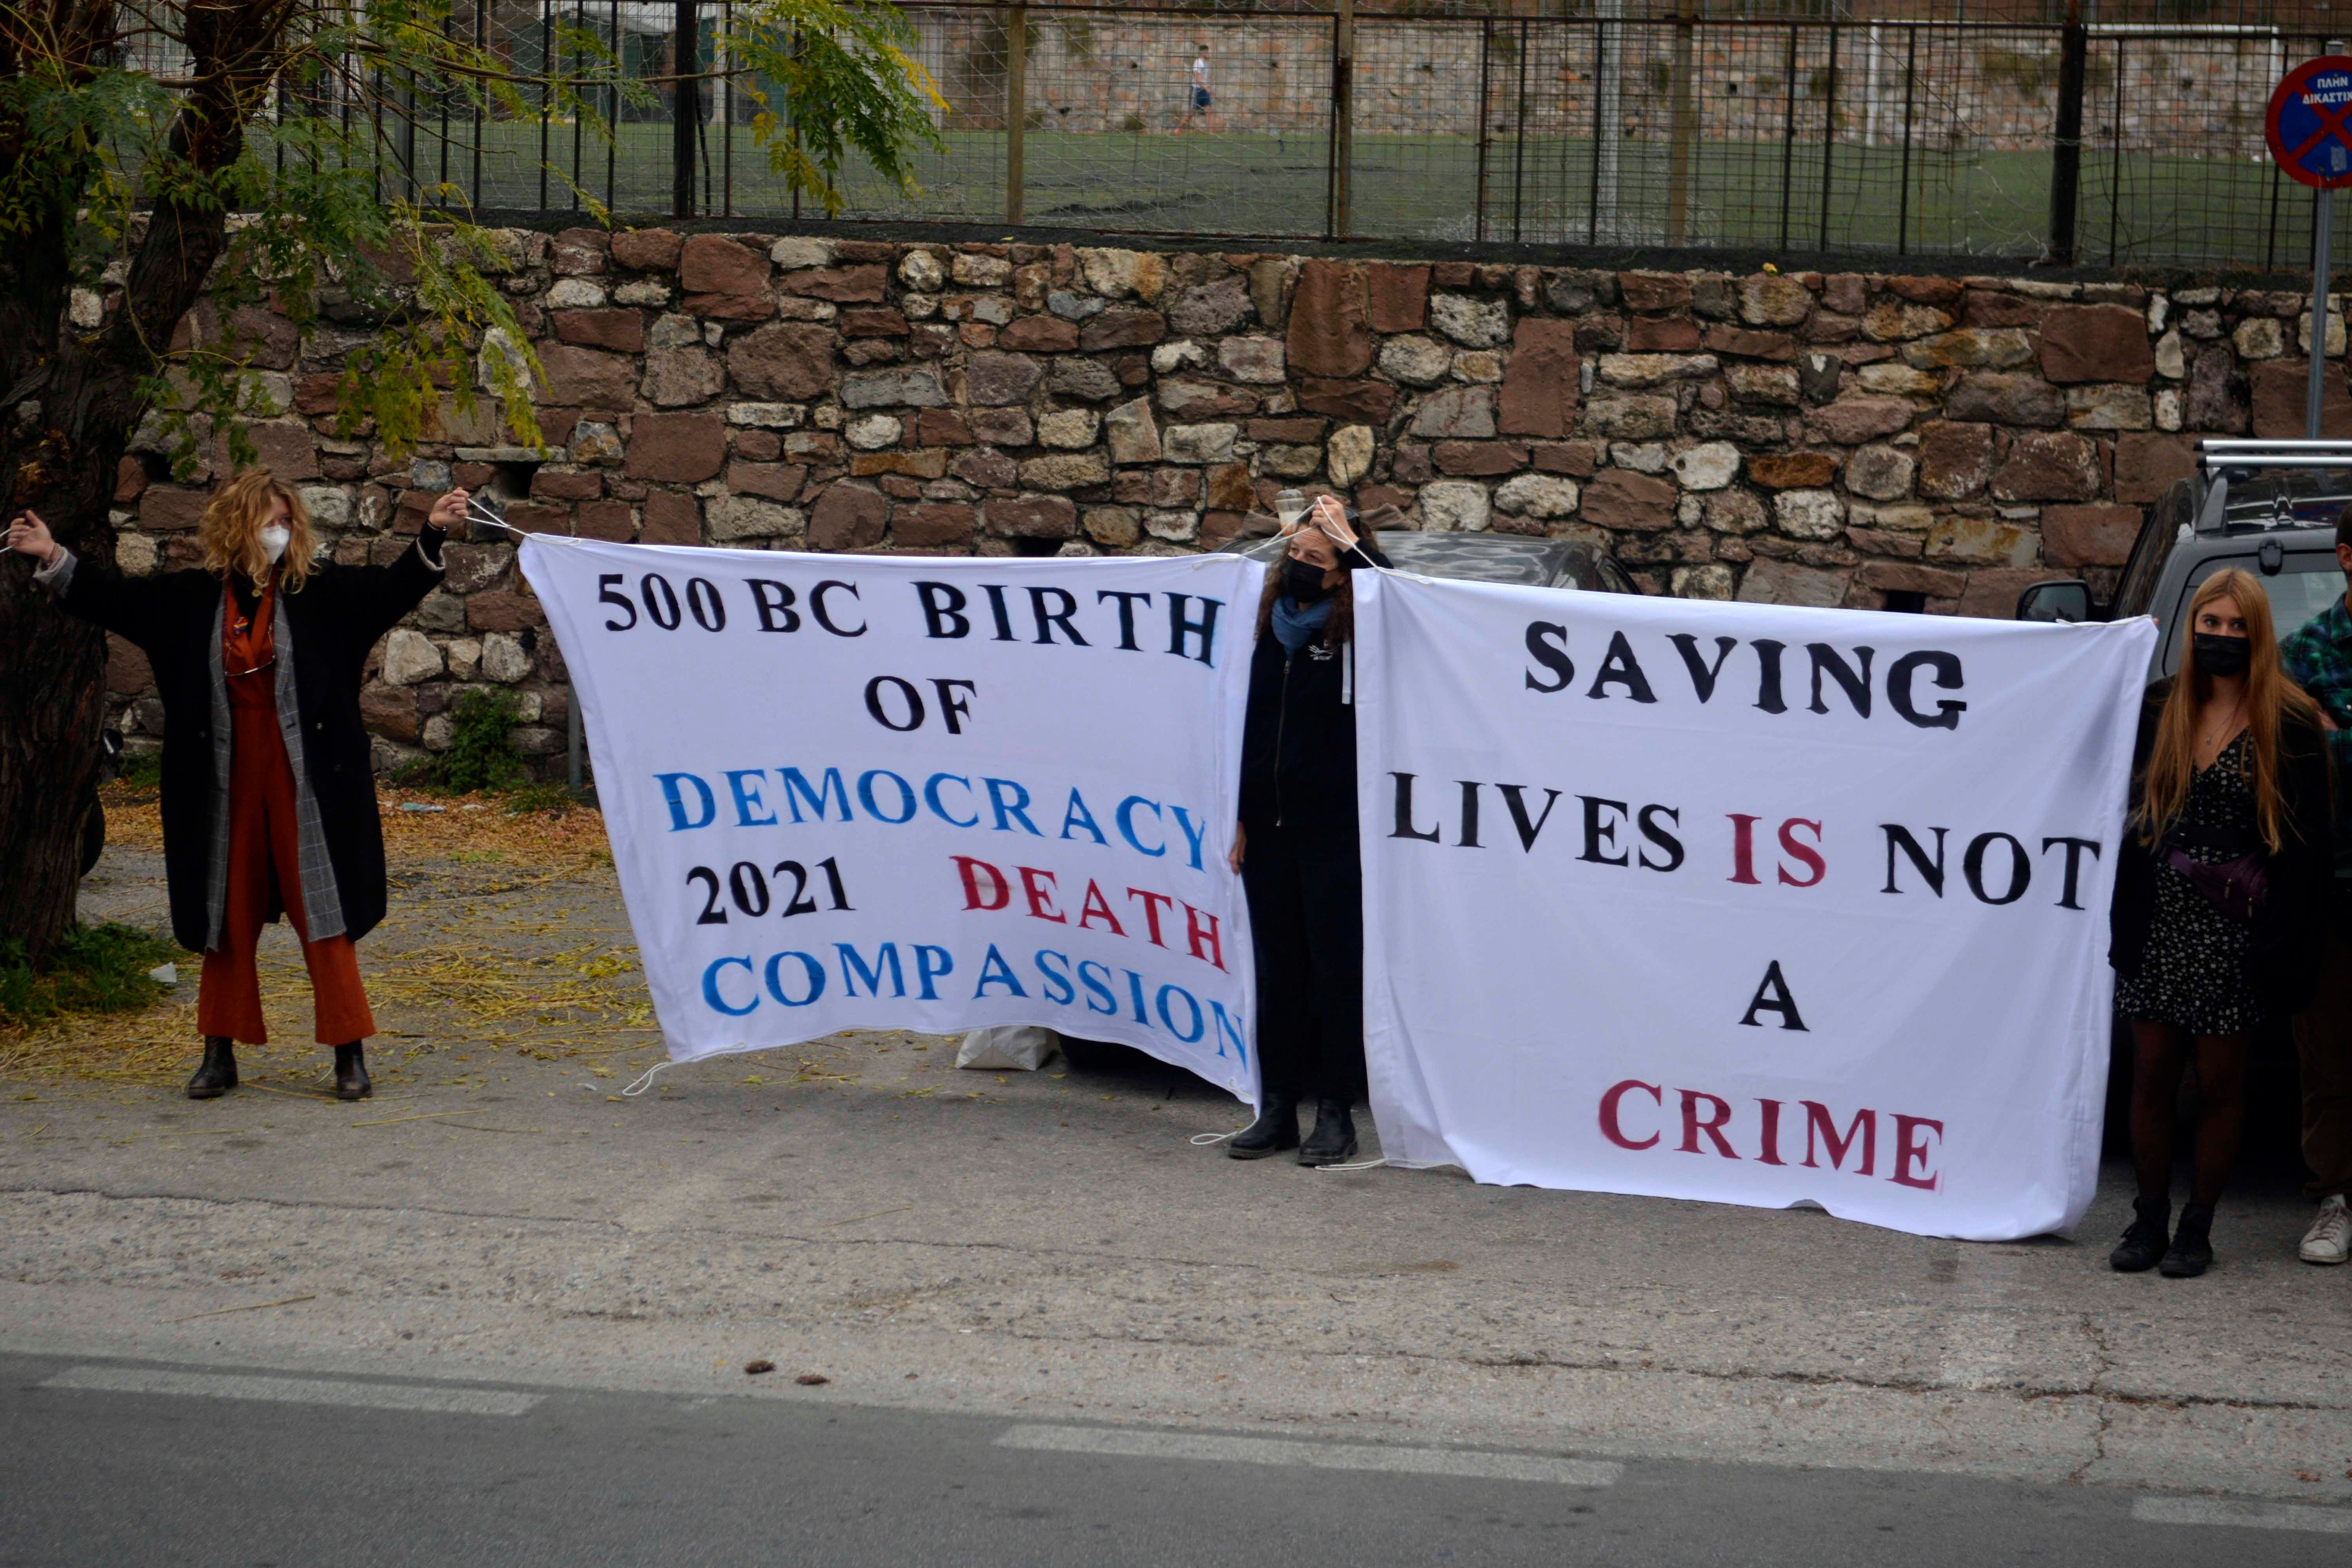 People hold banners outside a court